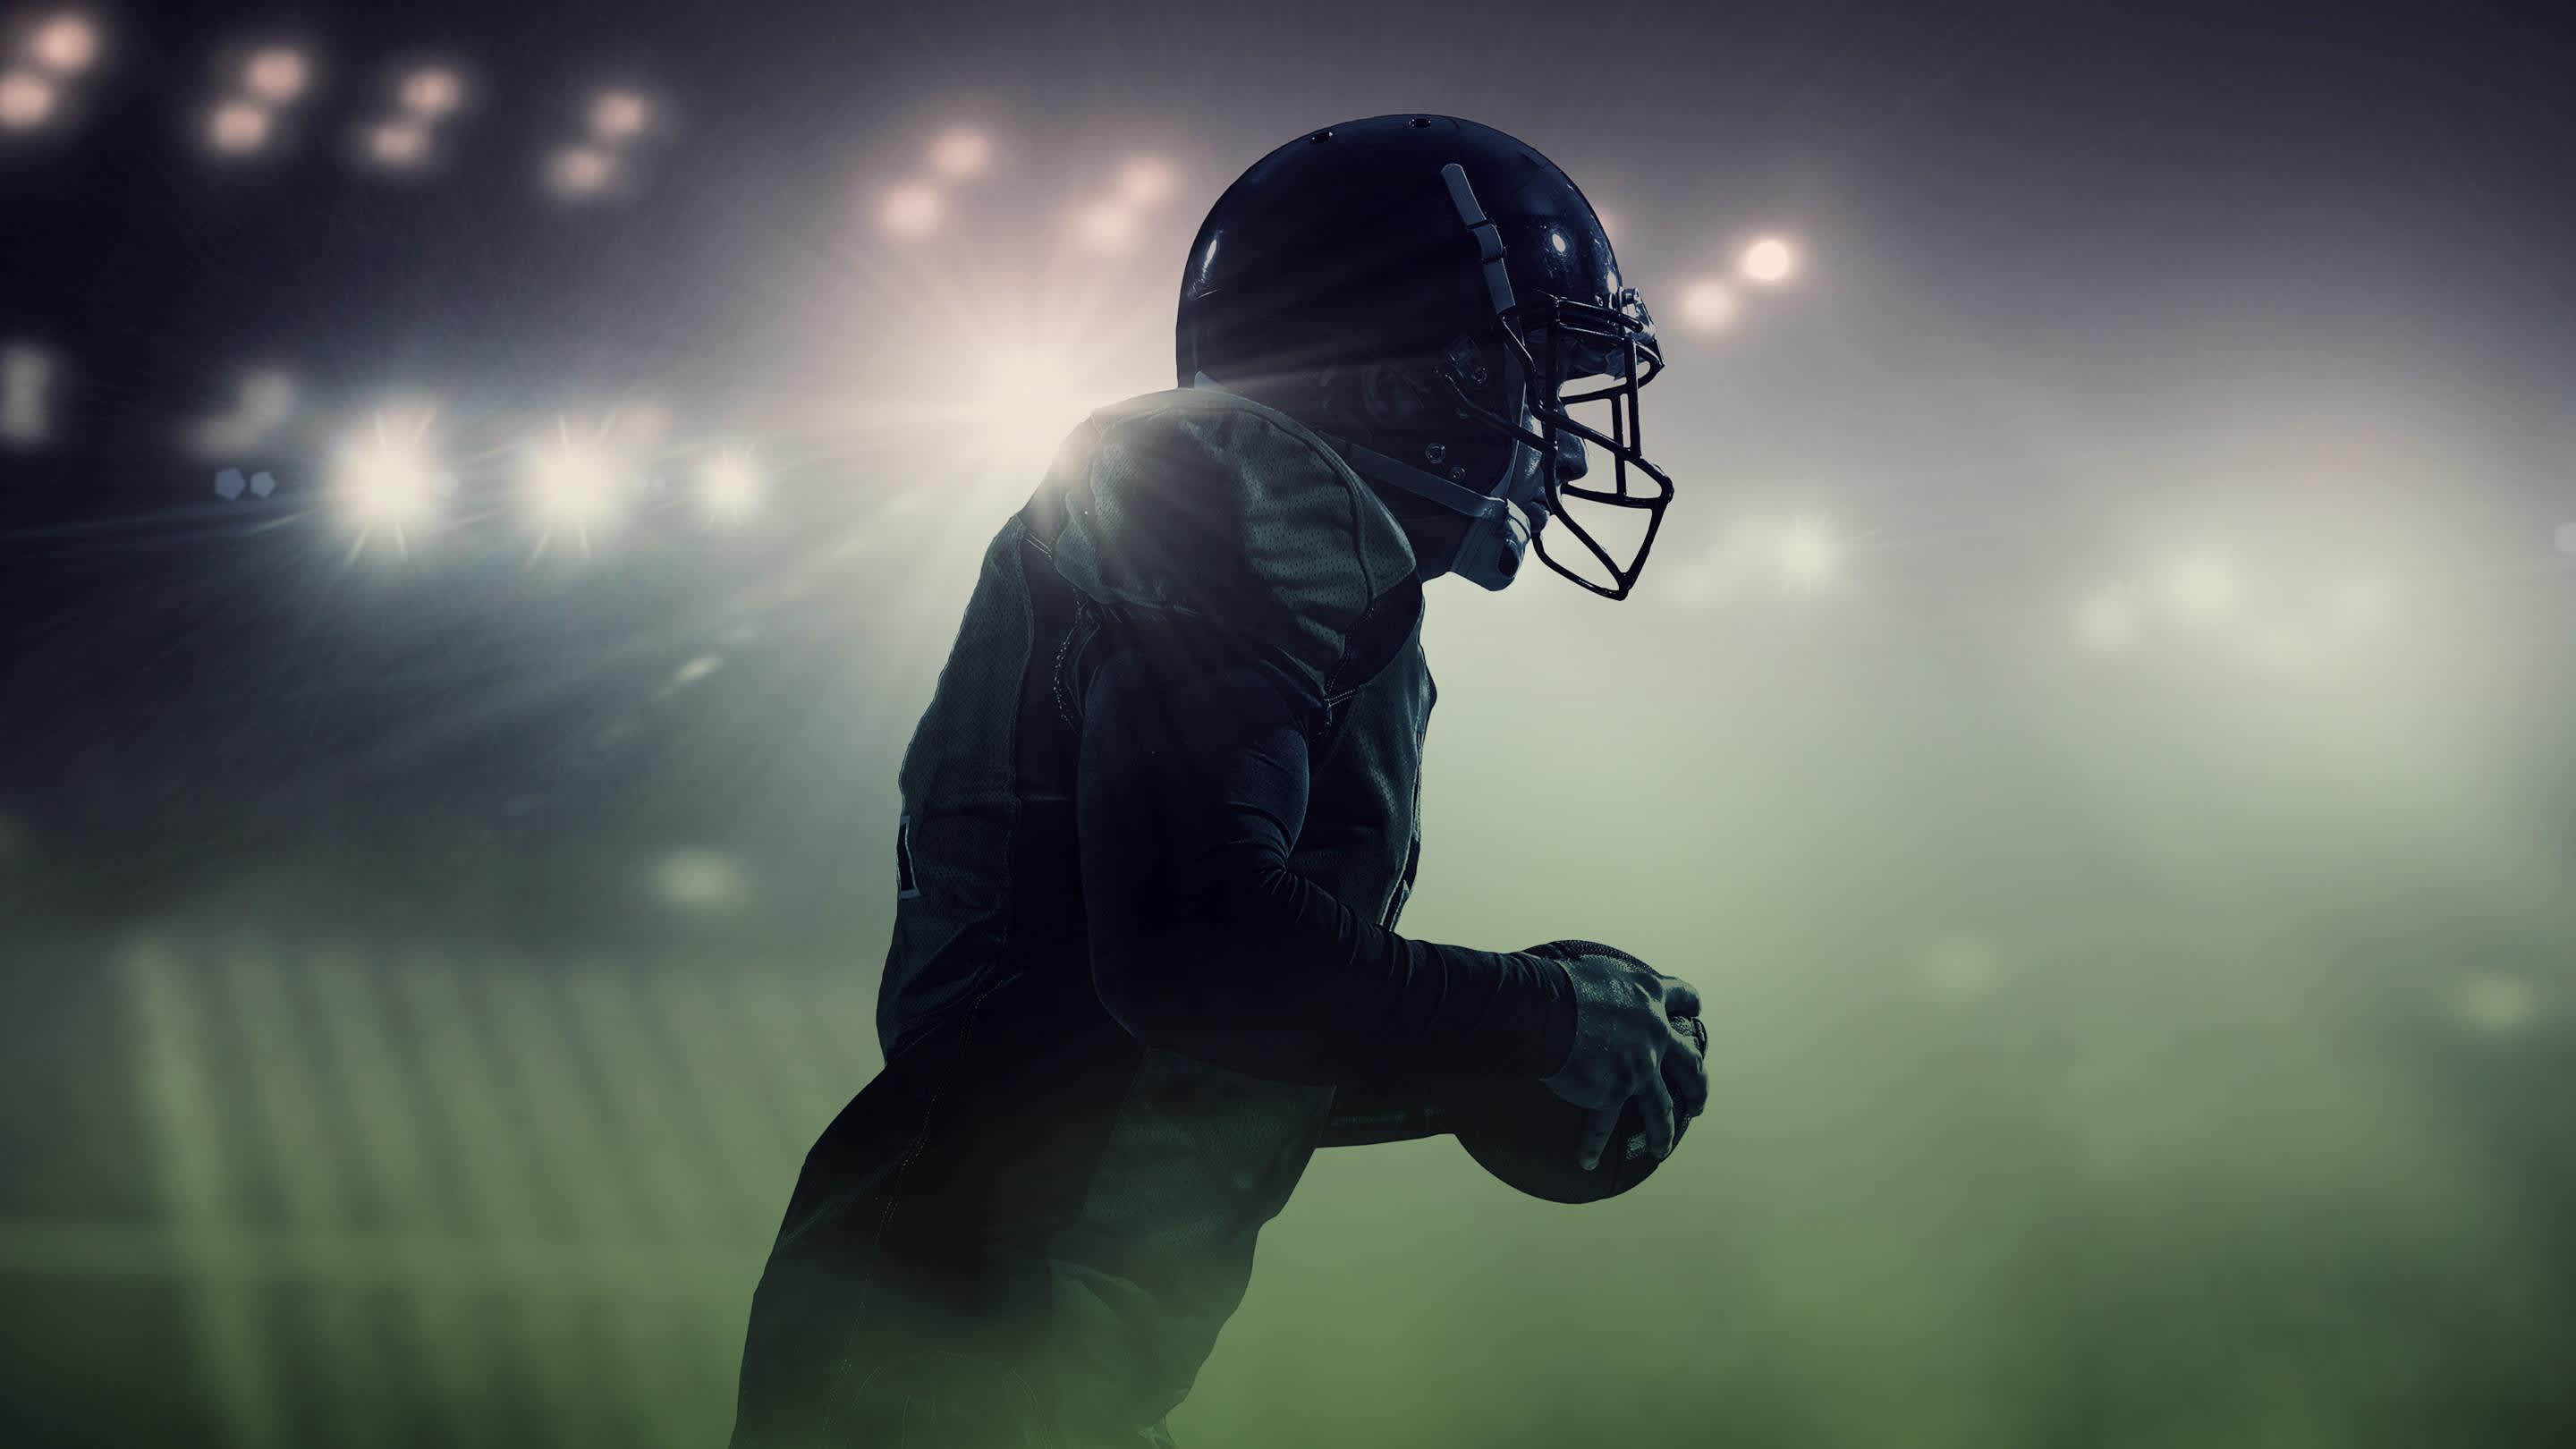 8 Former Nfl Players Share Their Thoughts On Cannabis